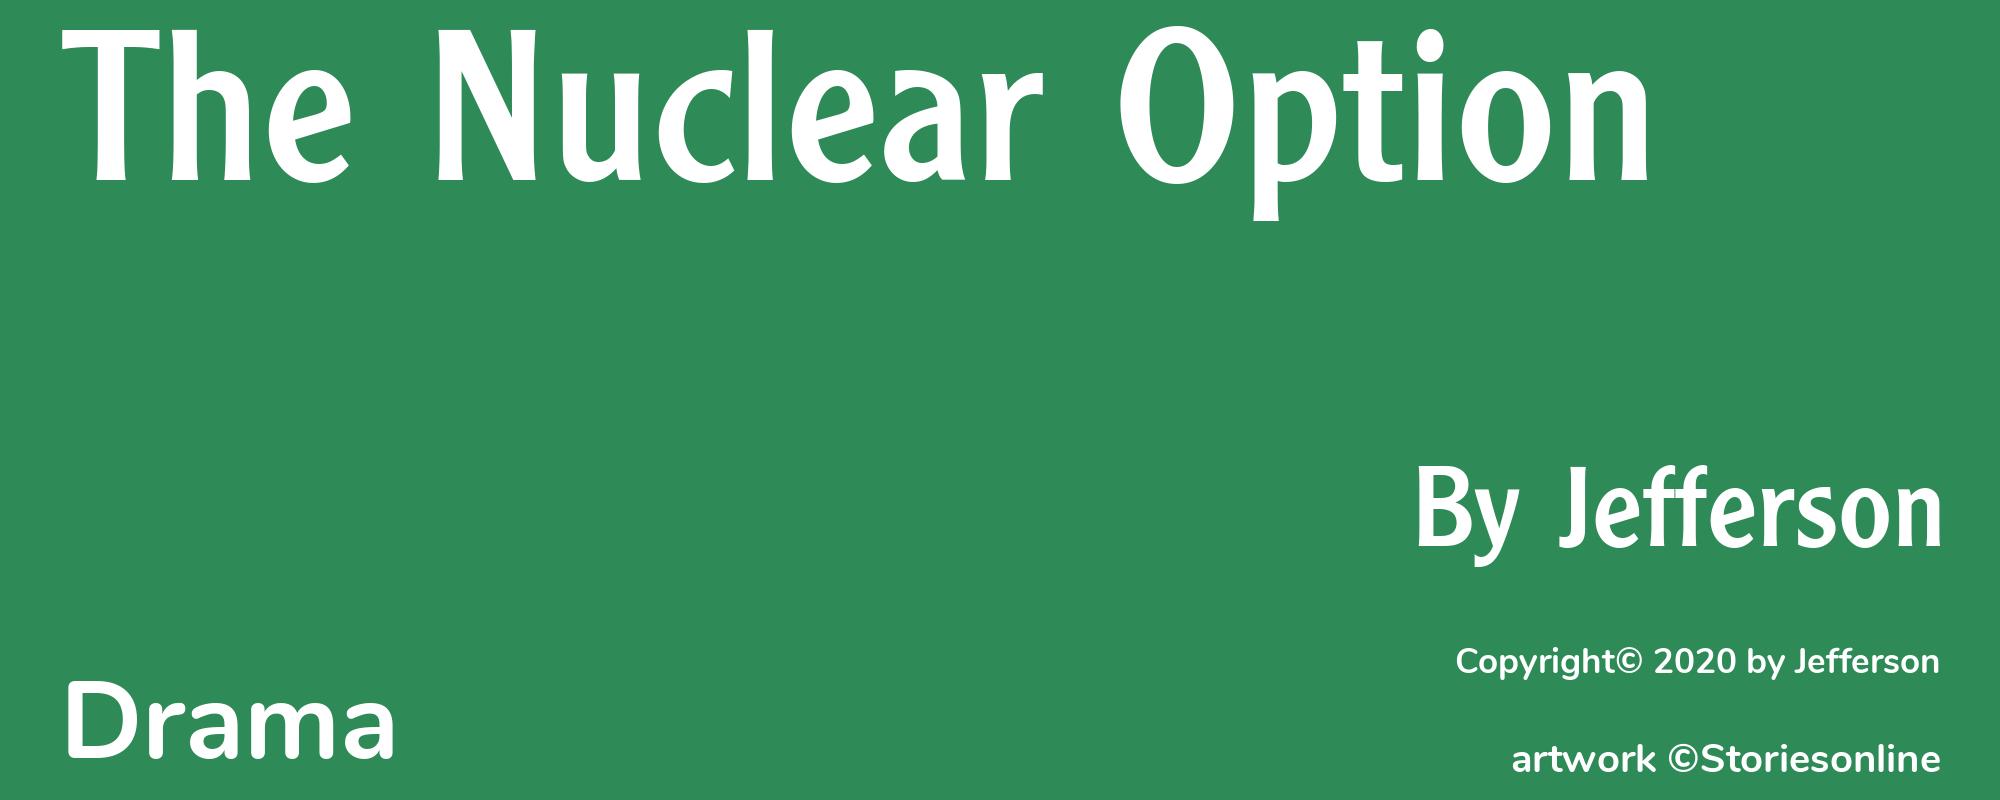 The Nuclear Option - Cover